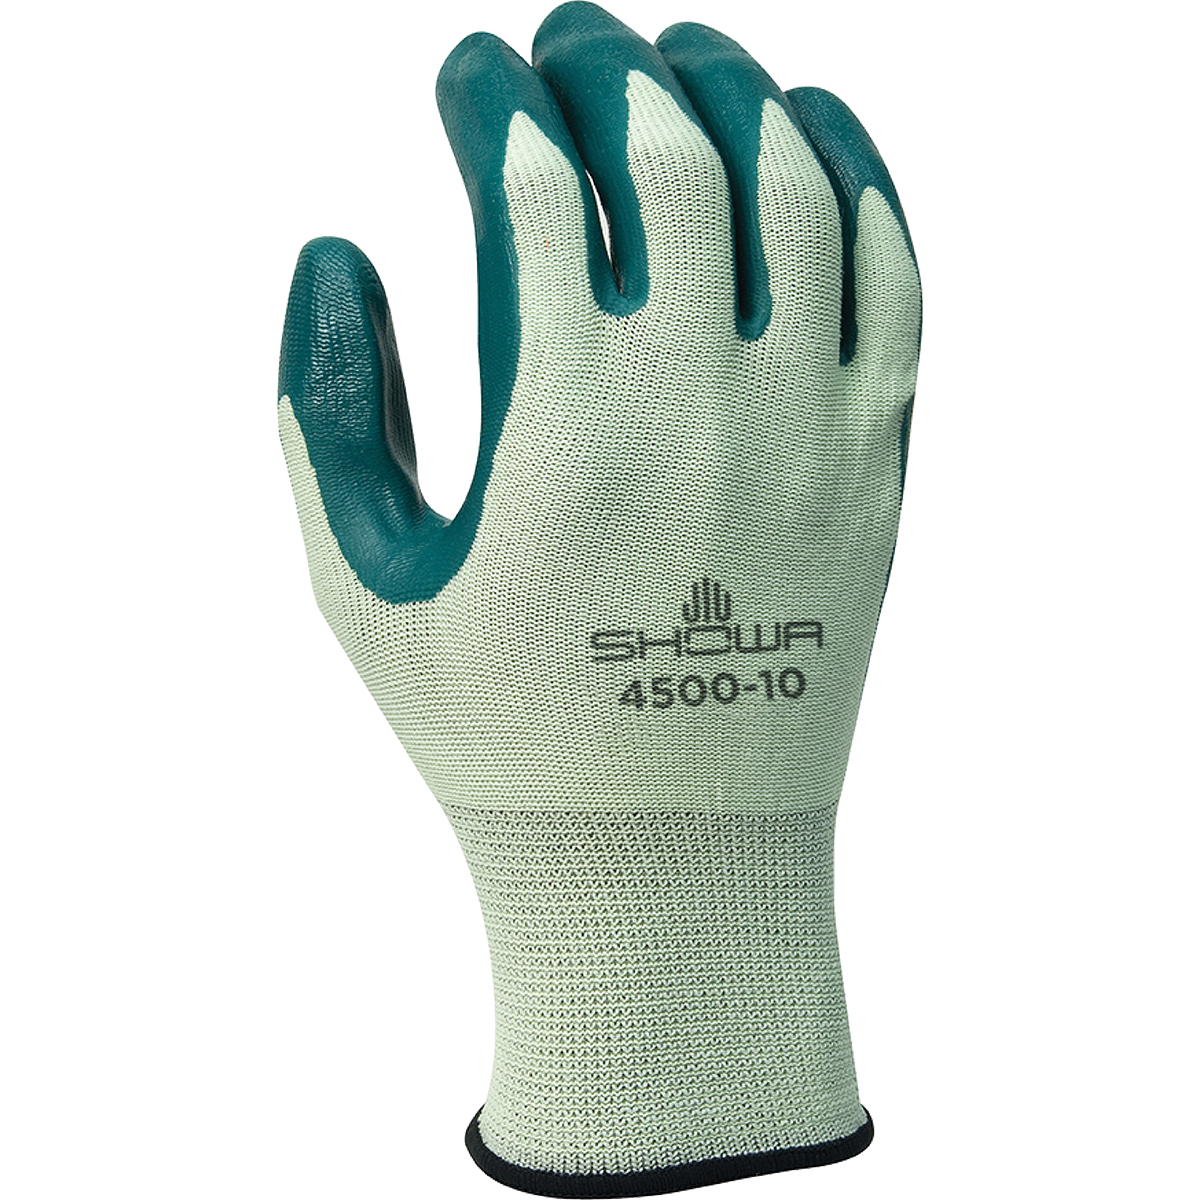 SHOWA® Size 7 Nitrile Palm Coated Work Gloves With Nylon Knit Liner And Knit Wrist